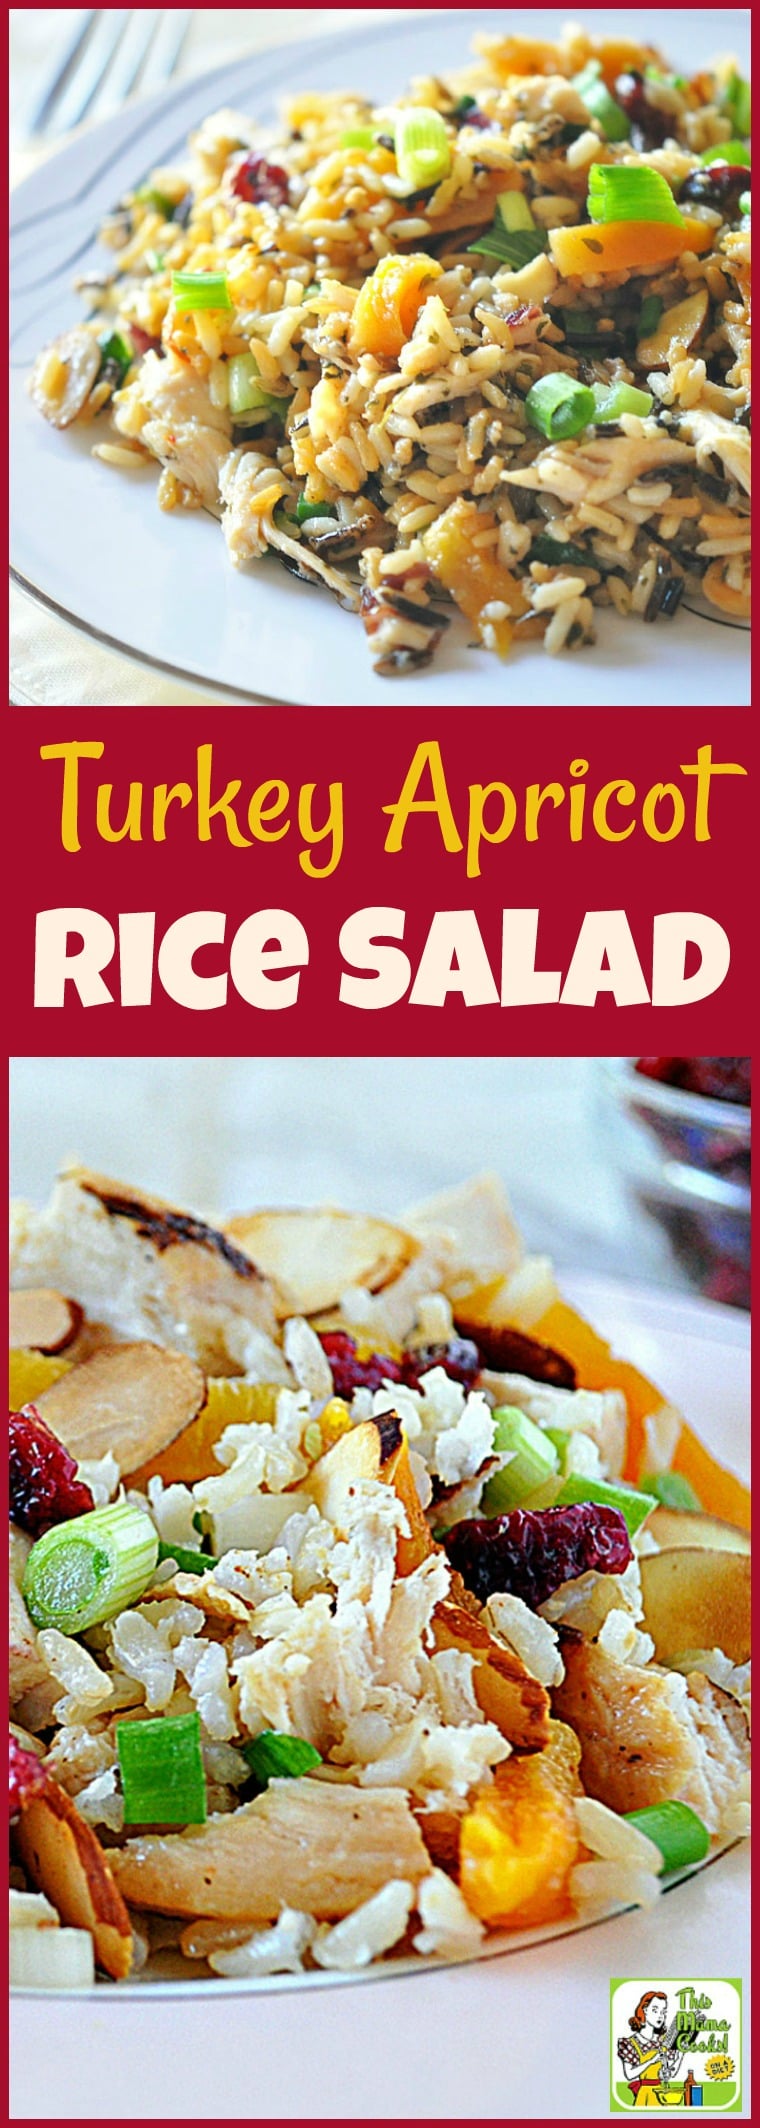 Cooking Thanksgiving leftovers? Then you'll love easy Thanksgiving leftover recipes like this Turkey Apricot Rice Salad! It's a gluten free salad recipe that's a handy way to use Thanksgiving leftovers. It's also diabetic friendly. #recipe #easy #recipeoftheday #healthyrecipes #glutenfree #easyrecipes #salad #turkey #thanksgiving #apricot #rice #diabeticfriendly #healthy #leftovers #thanksgivingleftovers